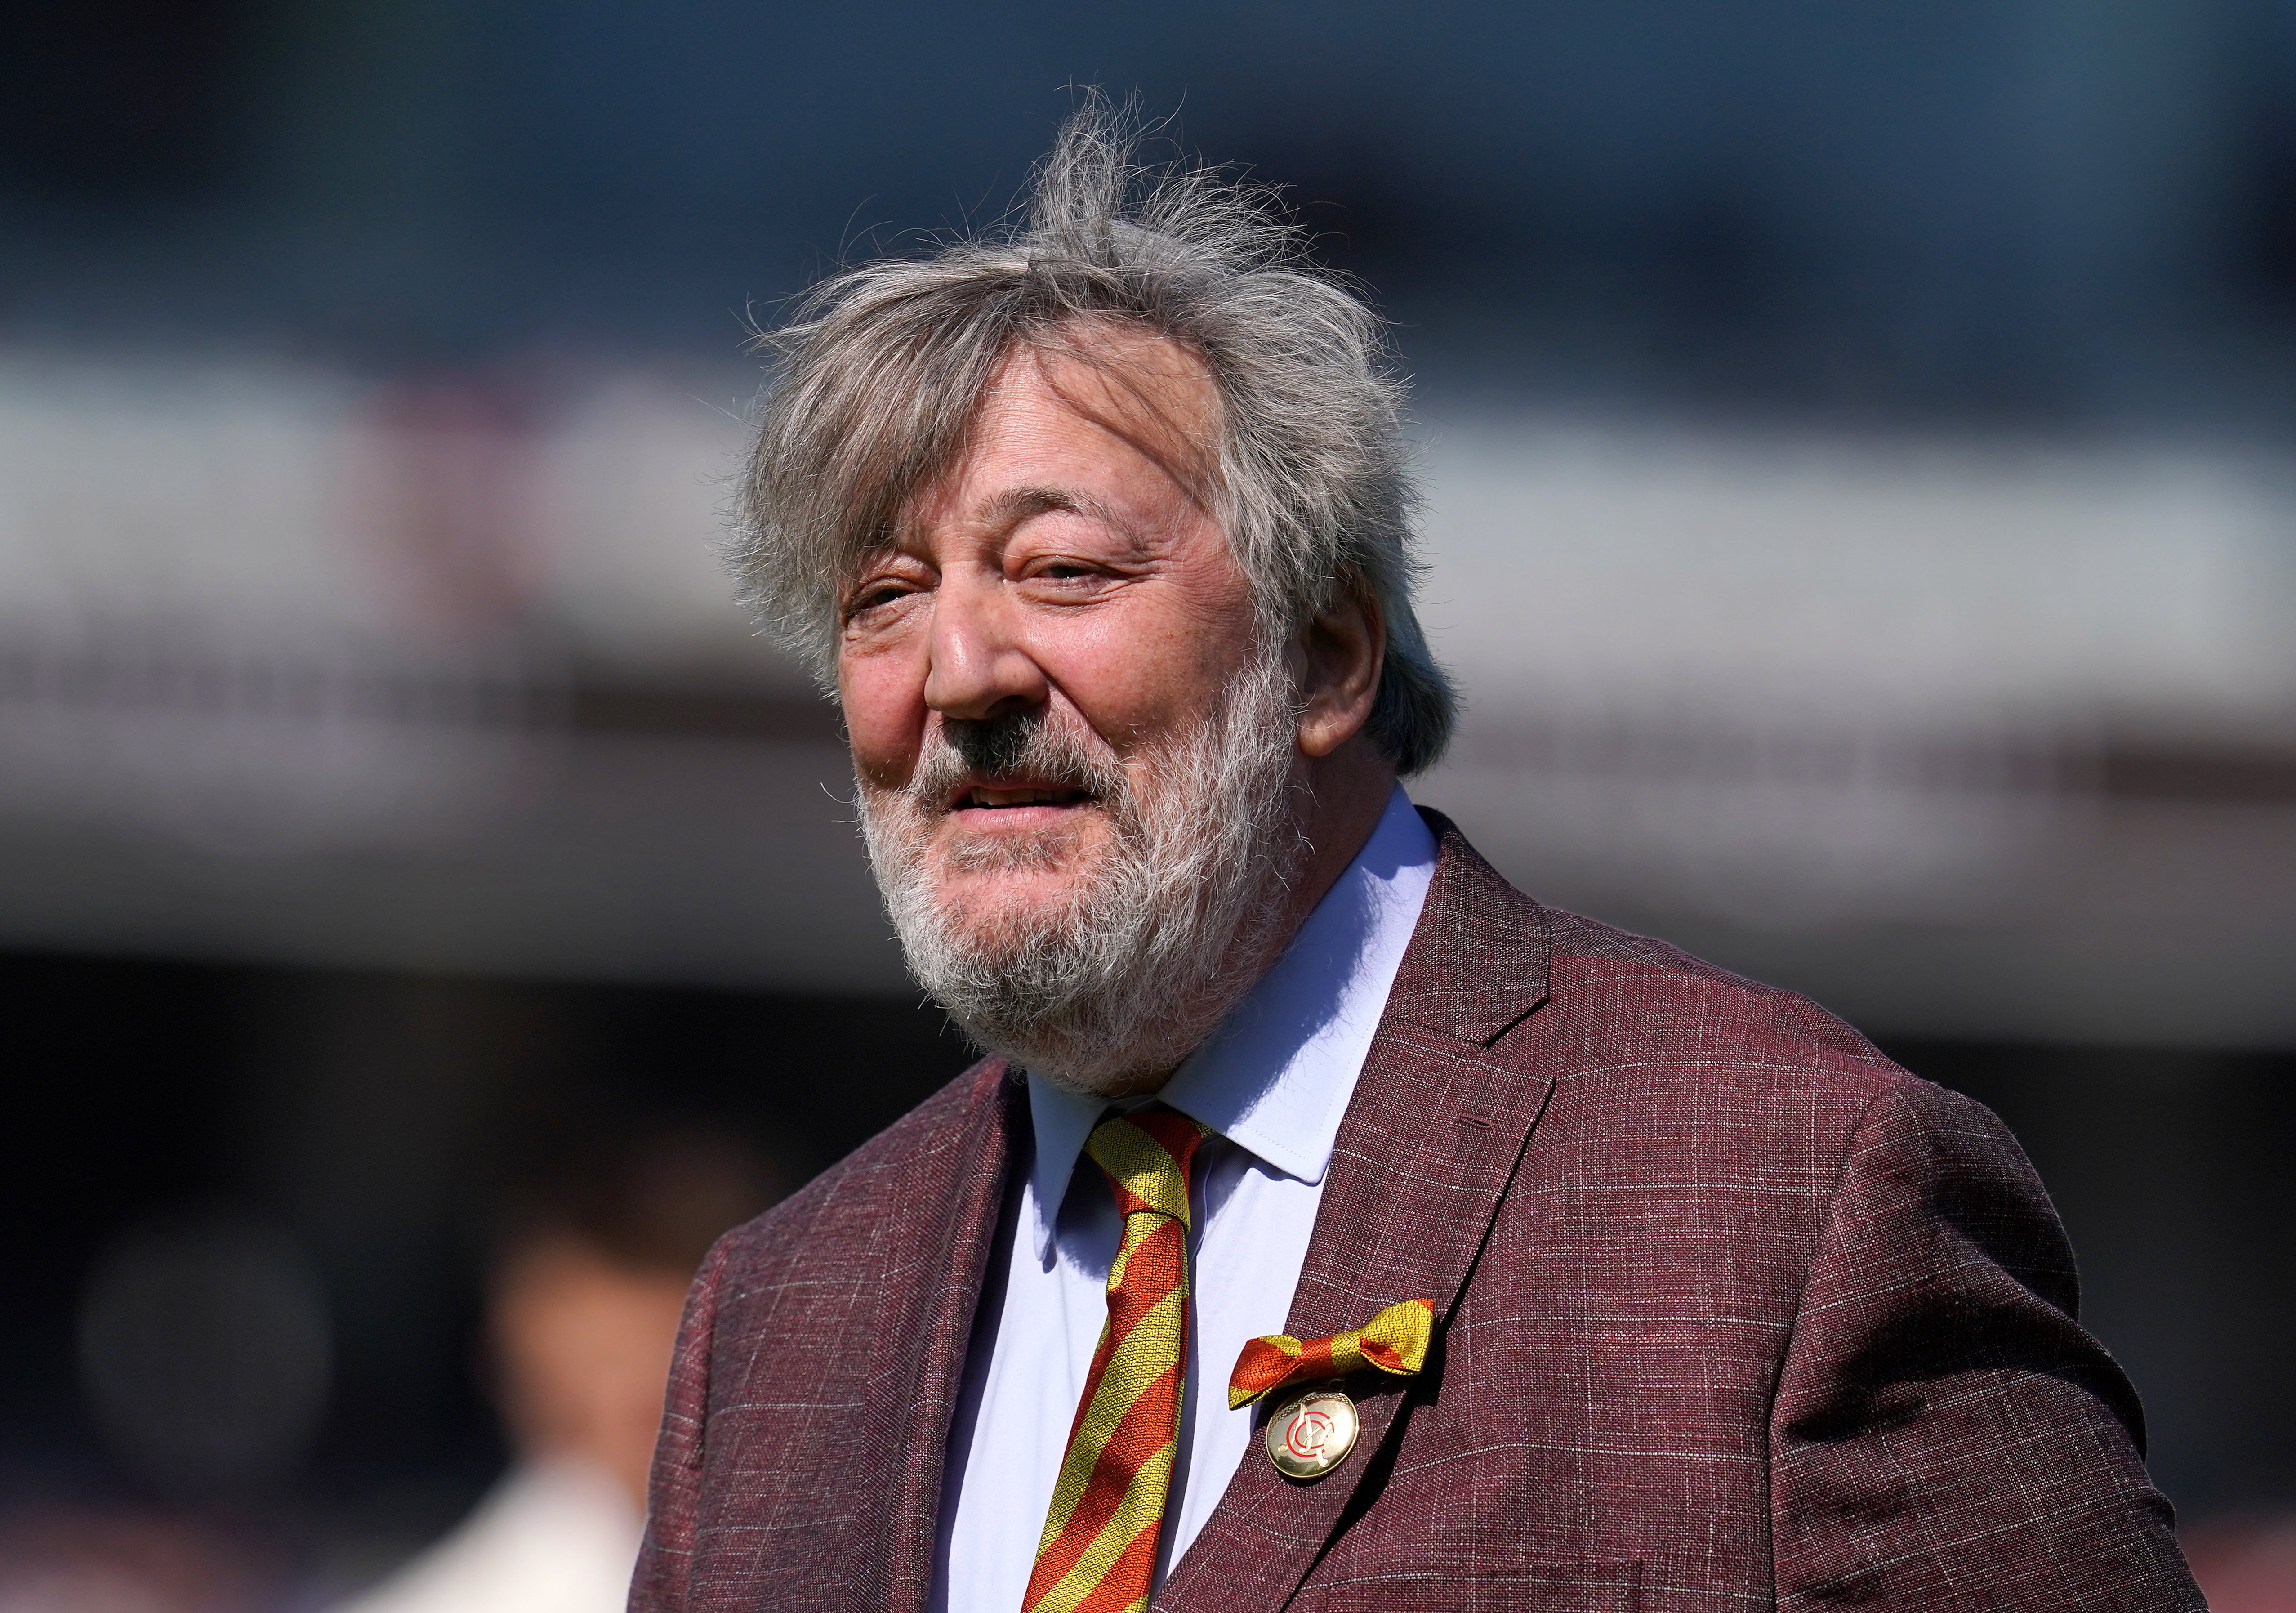 Stephen Fry fell around six feet from a stage while presenting a talk about AI